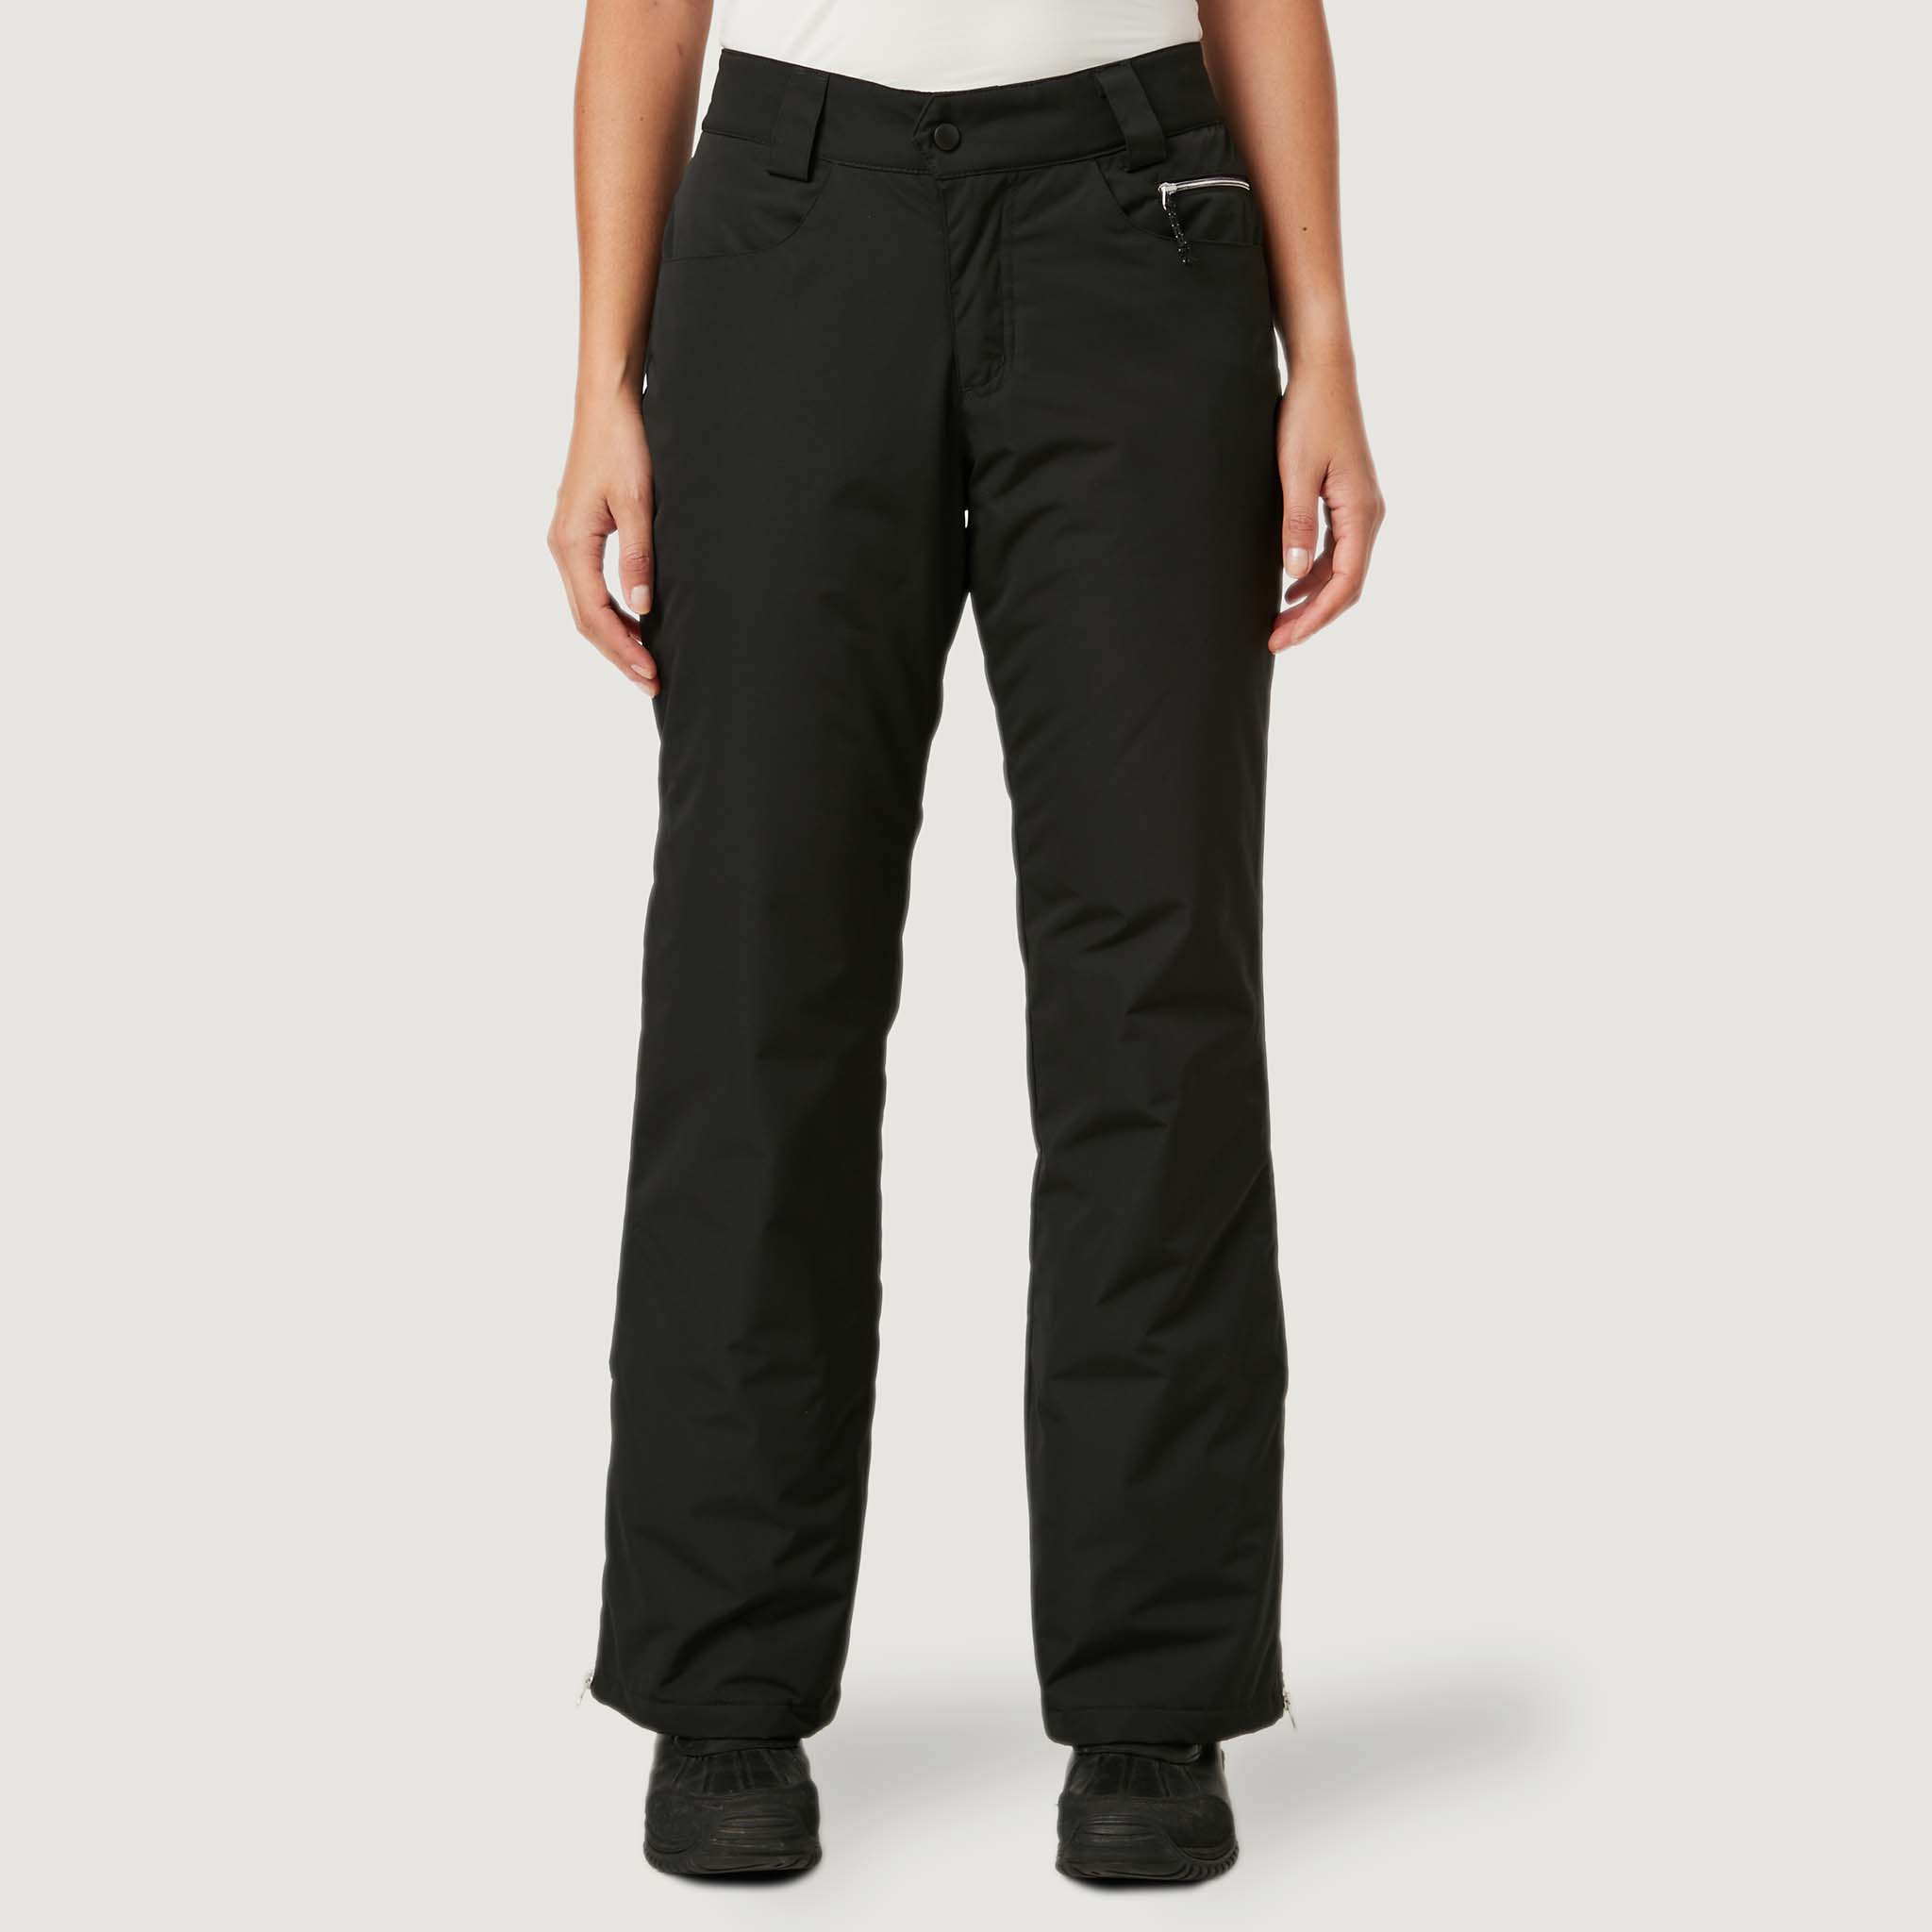 Skinny Ski Pants for Women - Up to 80% off